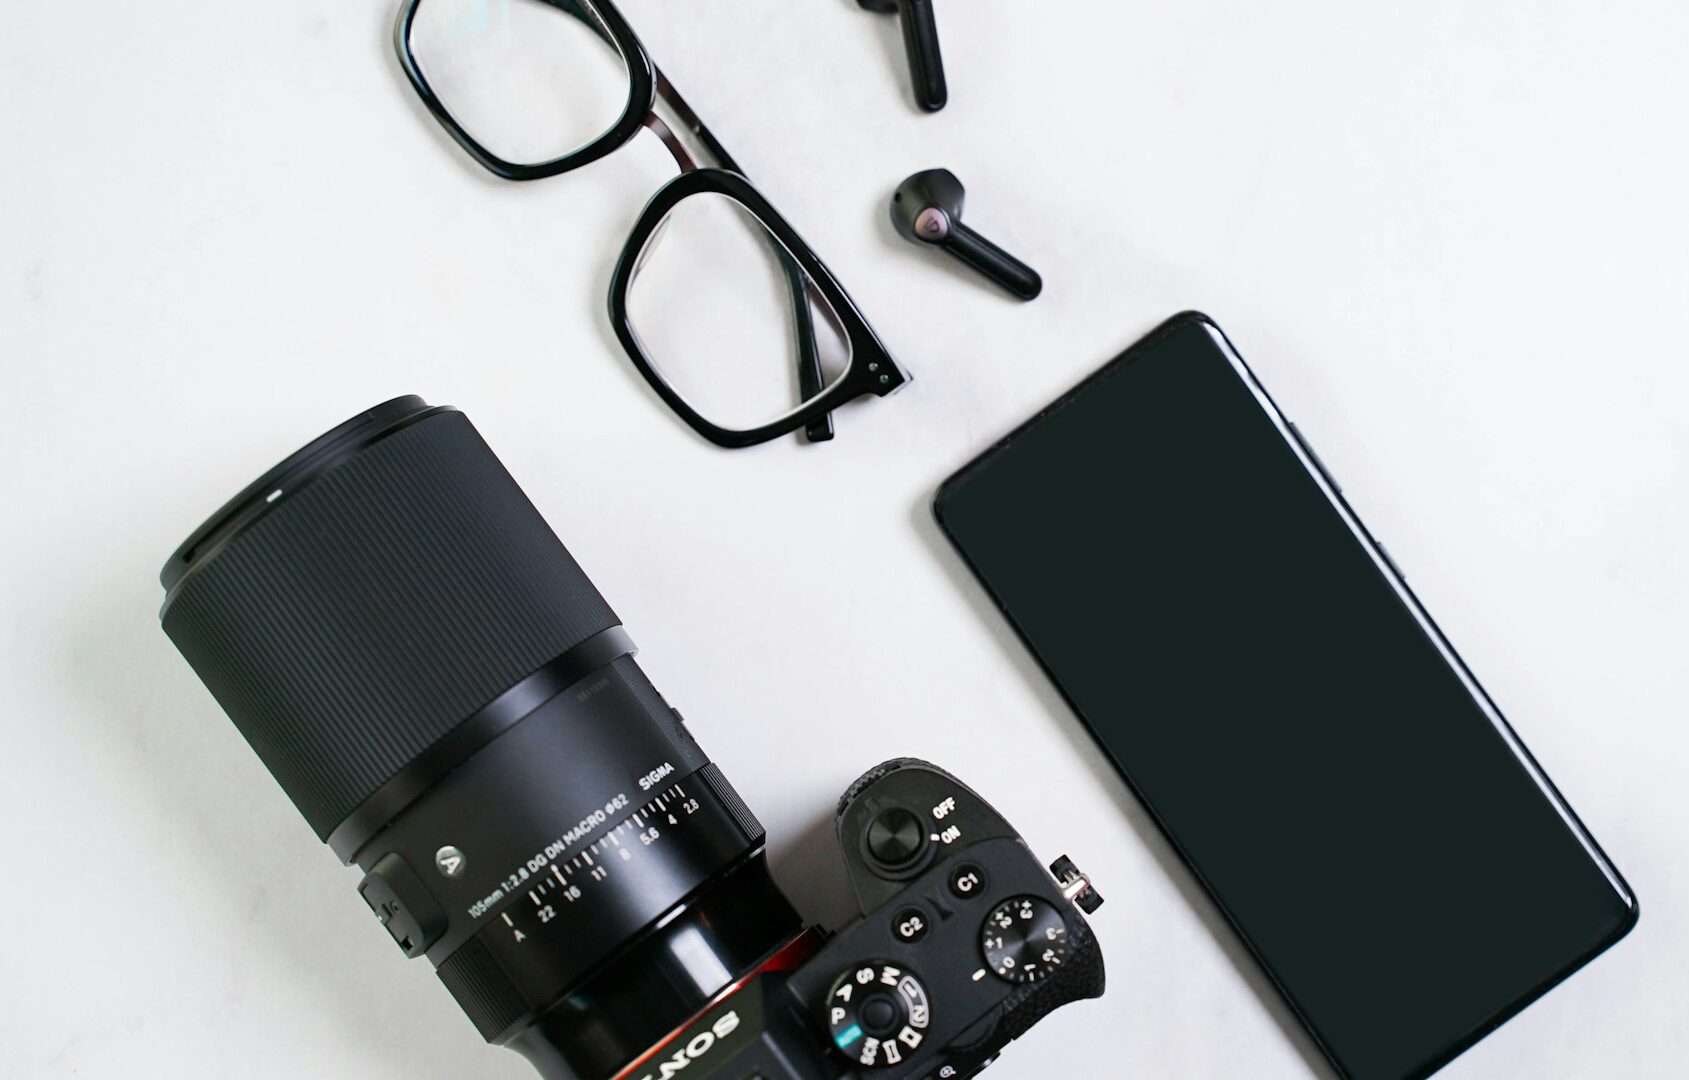 How to Transfer Photos from Sony Camera to Phone